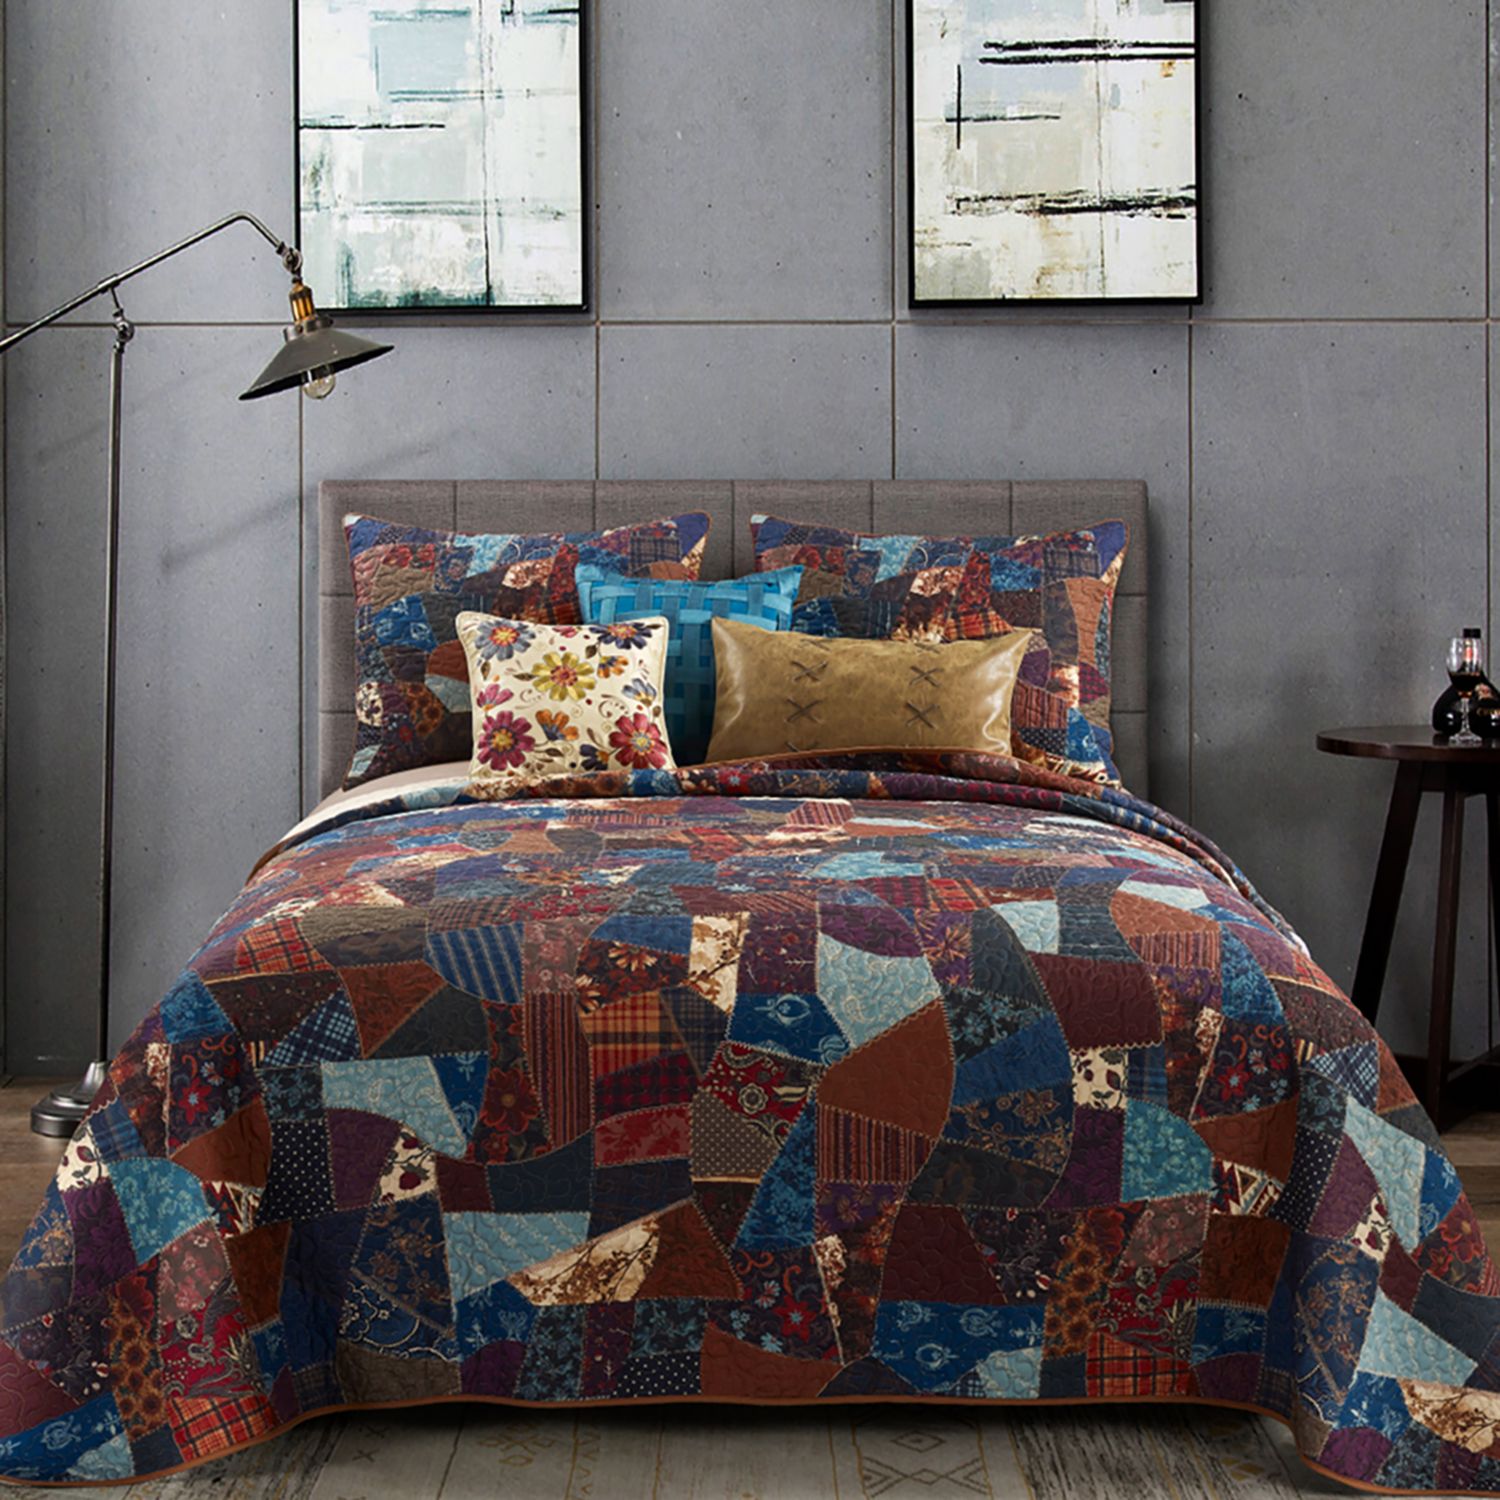 Image for Donna Sharp Dizzy Pattern Quilt or Sham at Kohl's.